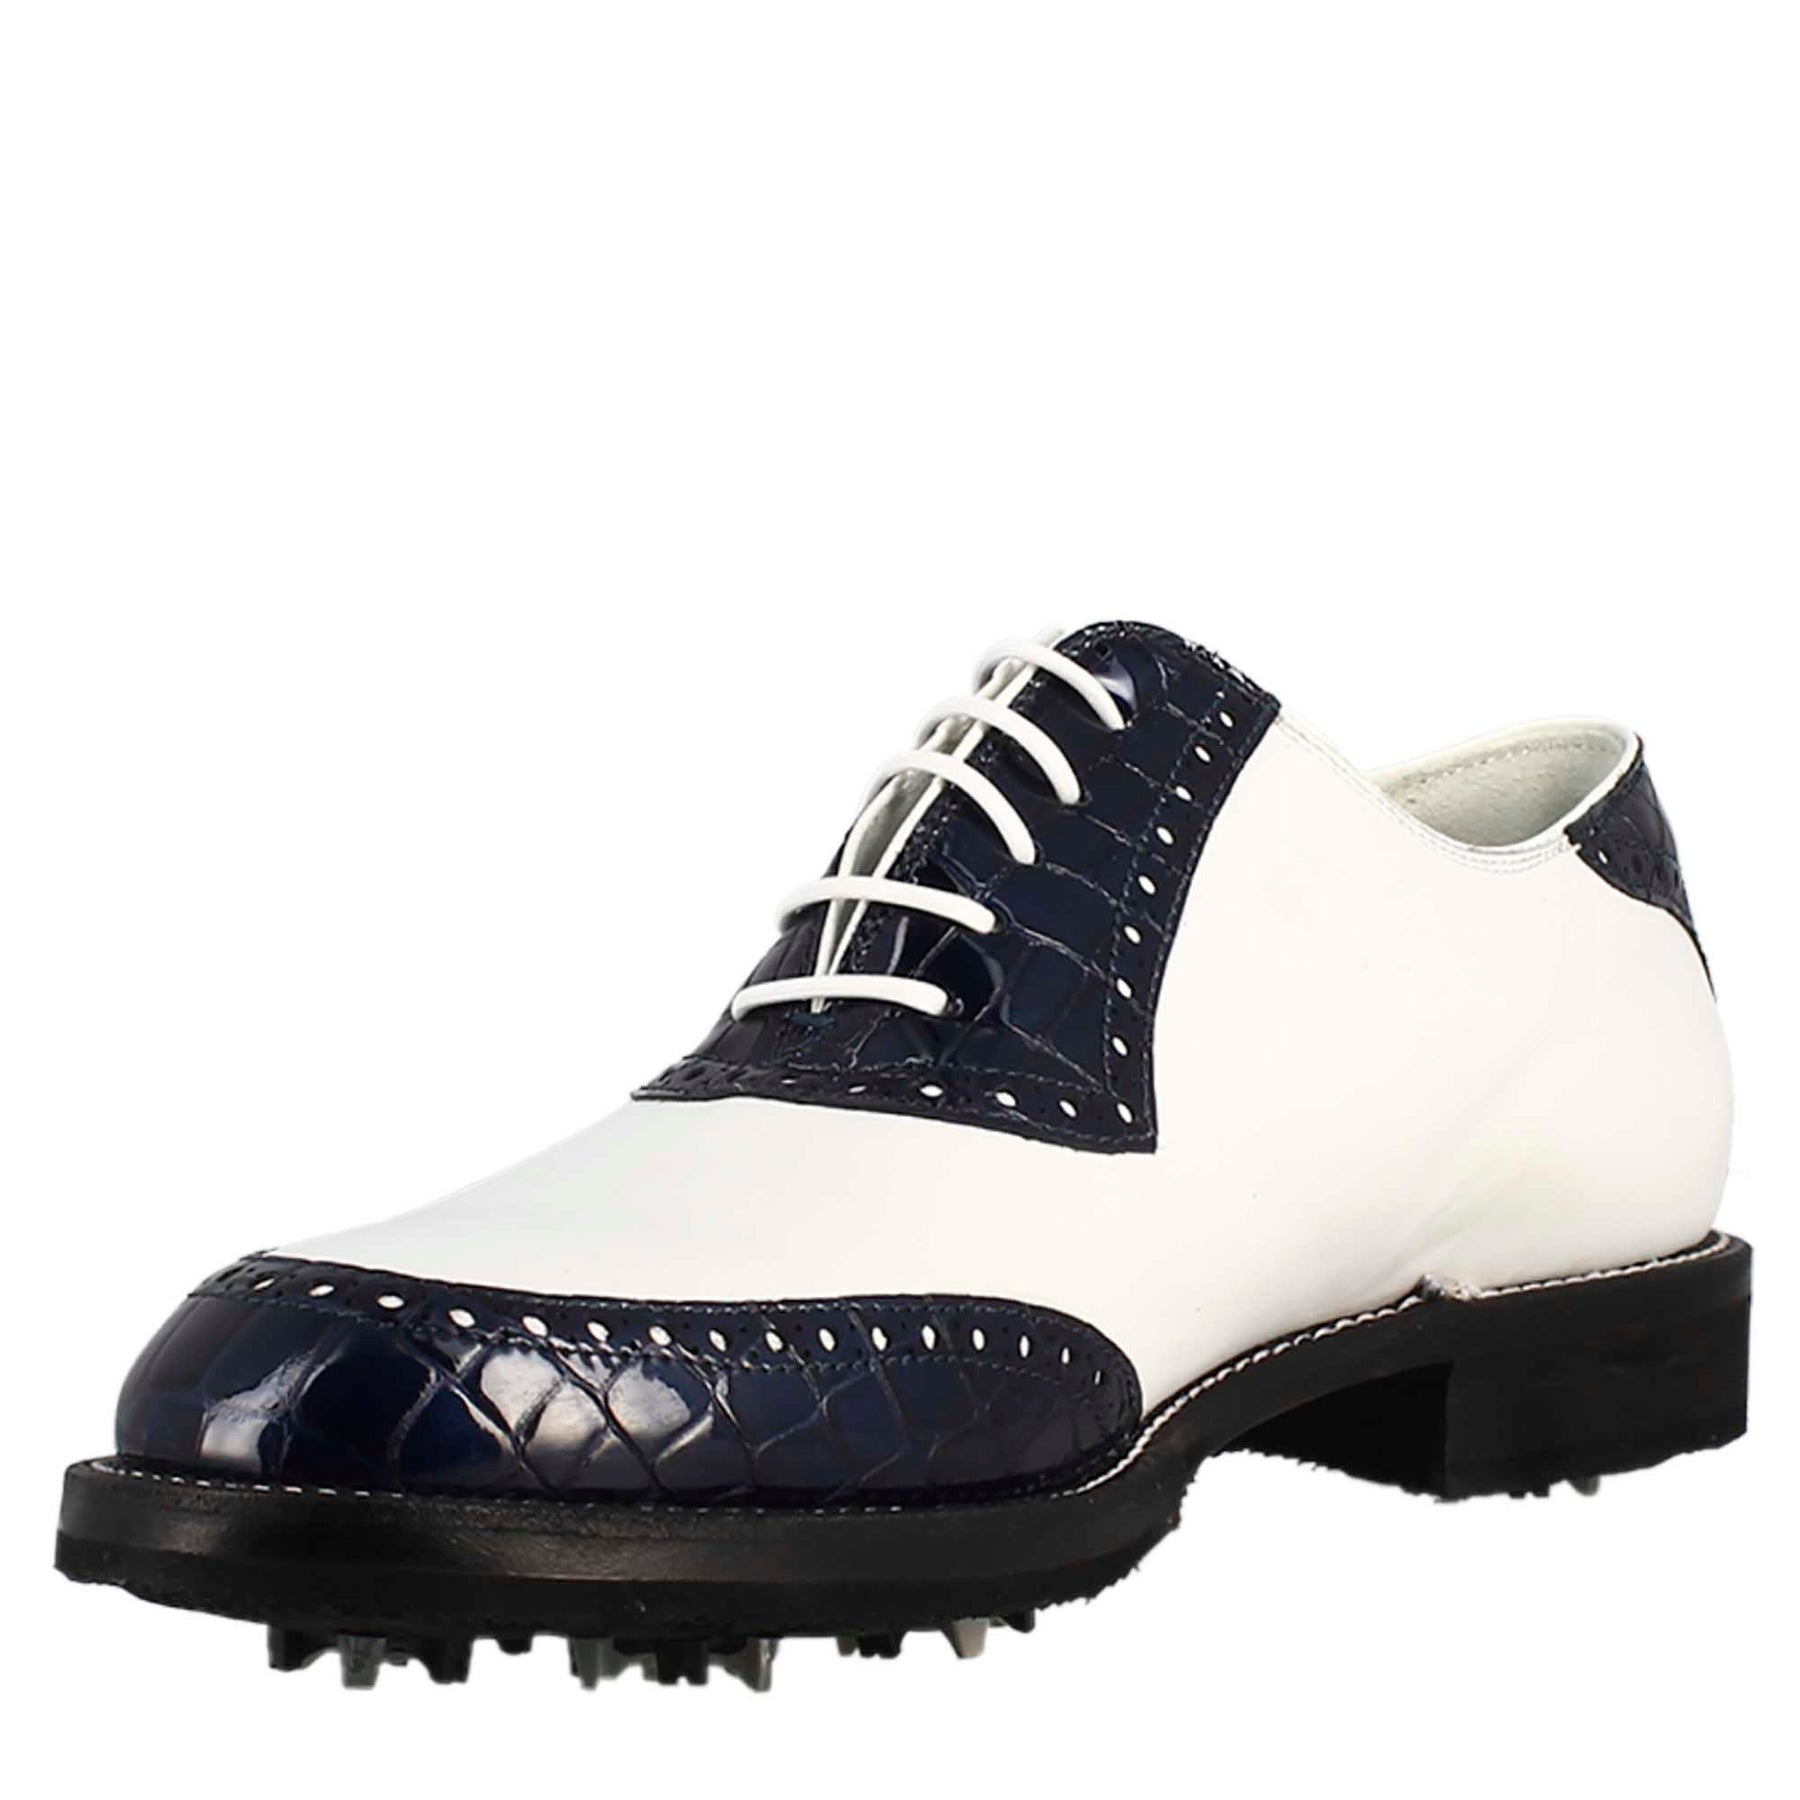 Handcrafted men's golf shoes in white leather and blue coconut